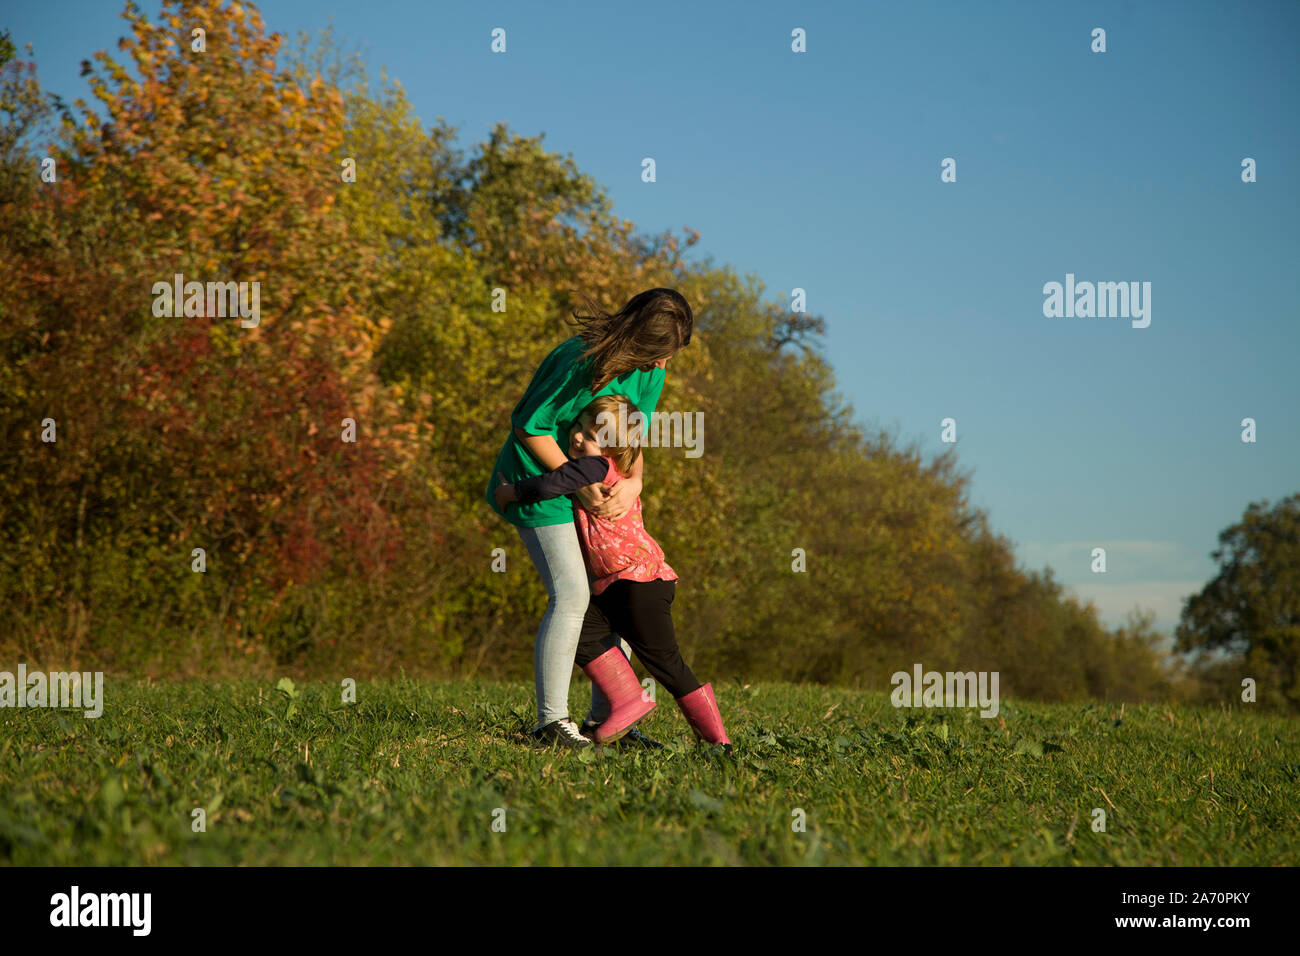 Natural portrait of young girls having fun in autumn colorful sun in nature. Stock Photo